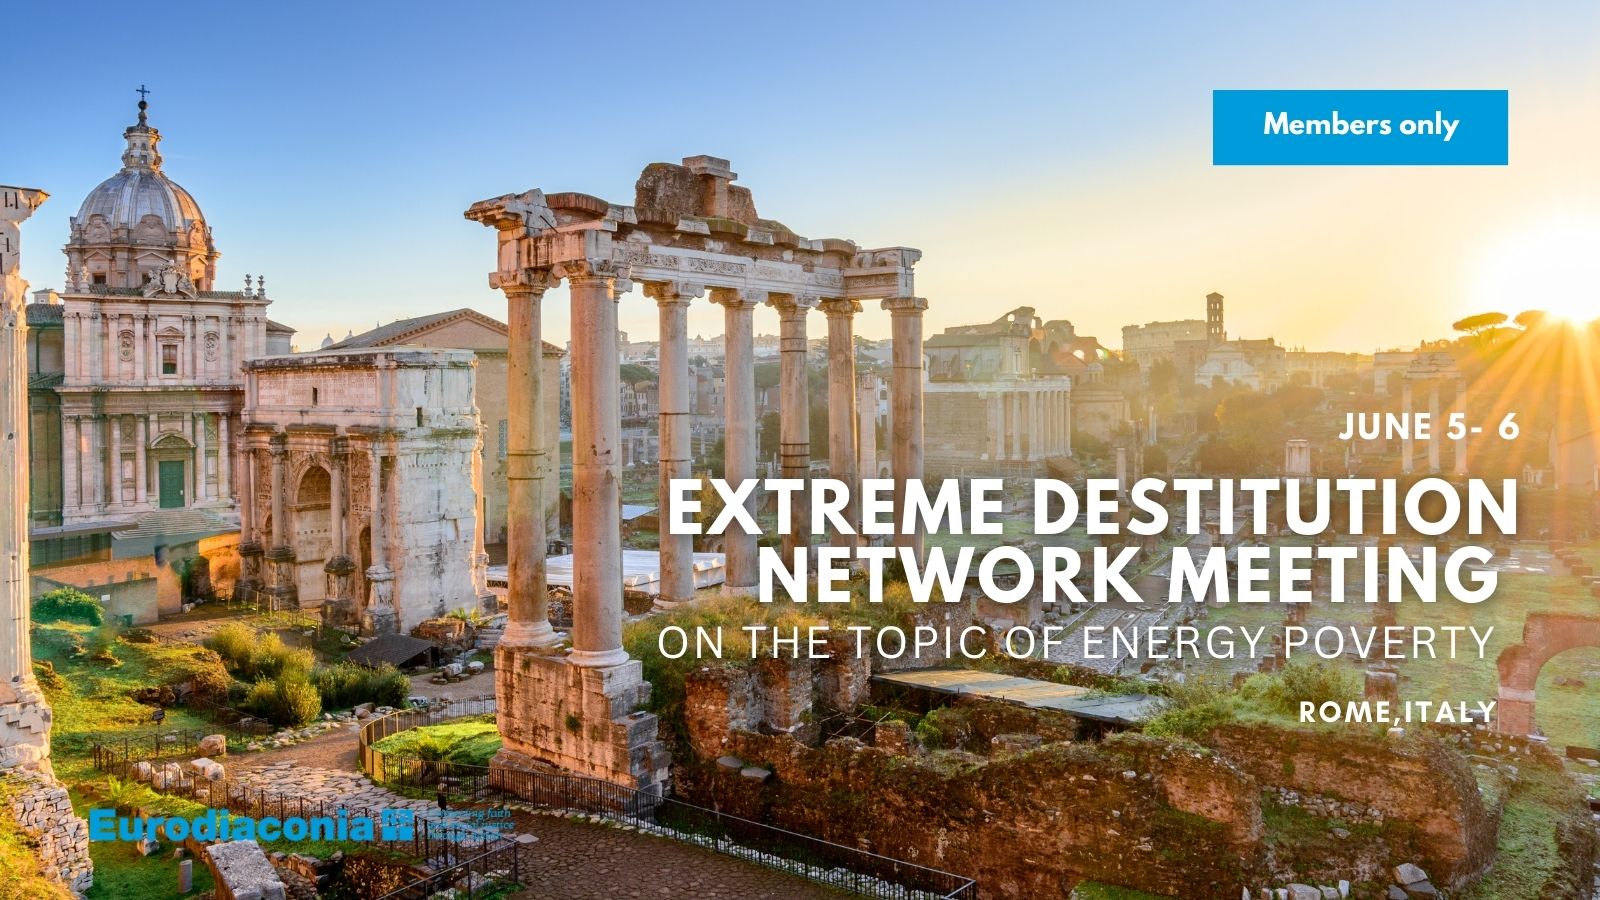 Extreme Destitution Network Meeting on the topic of Energy Poverty | Members only event Rome, Italy